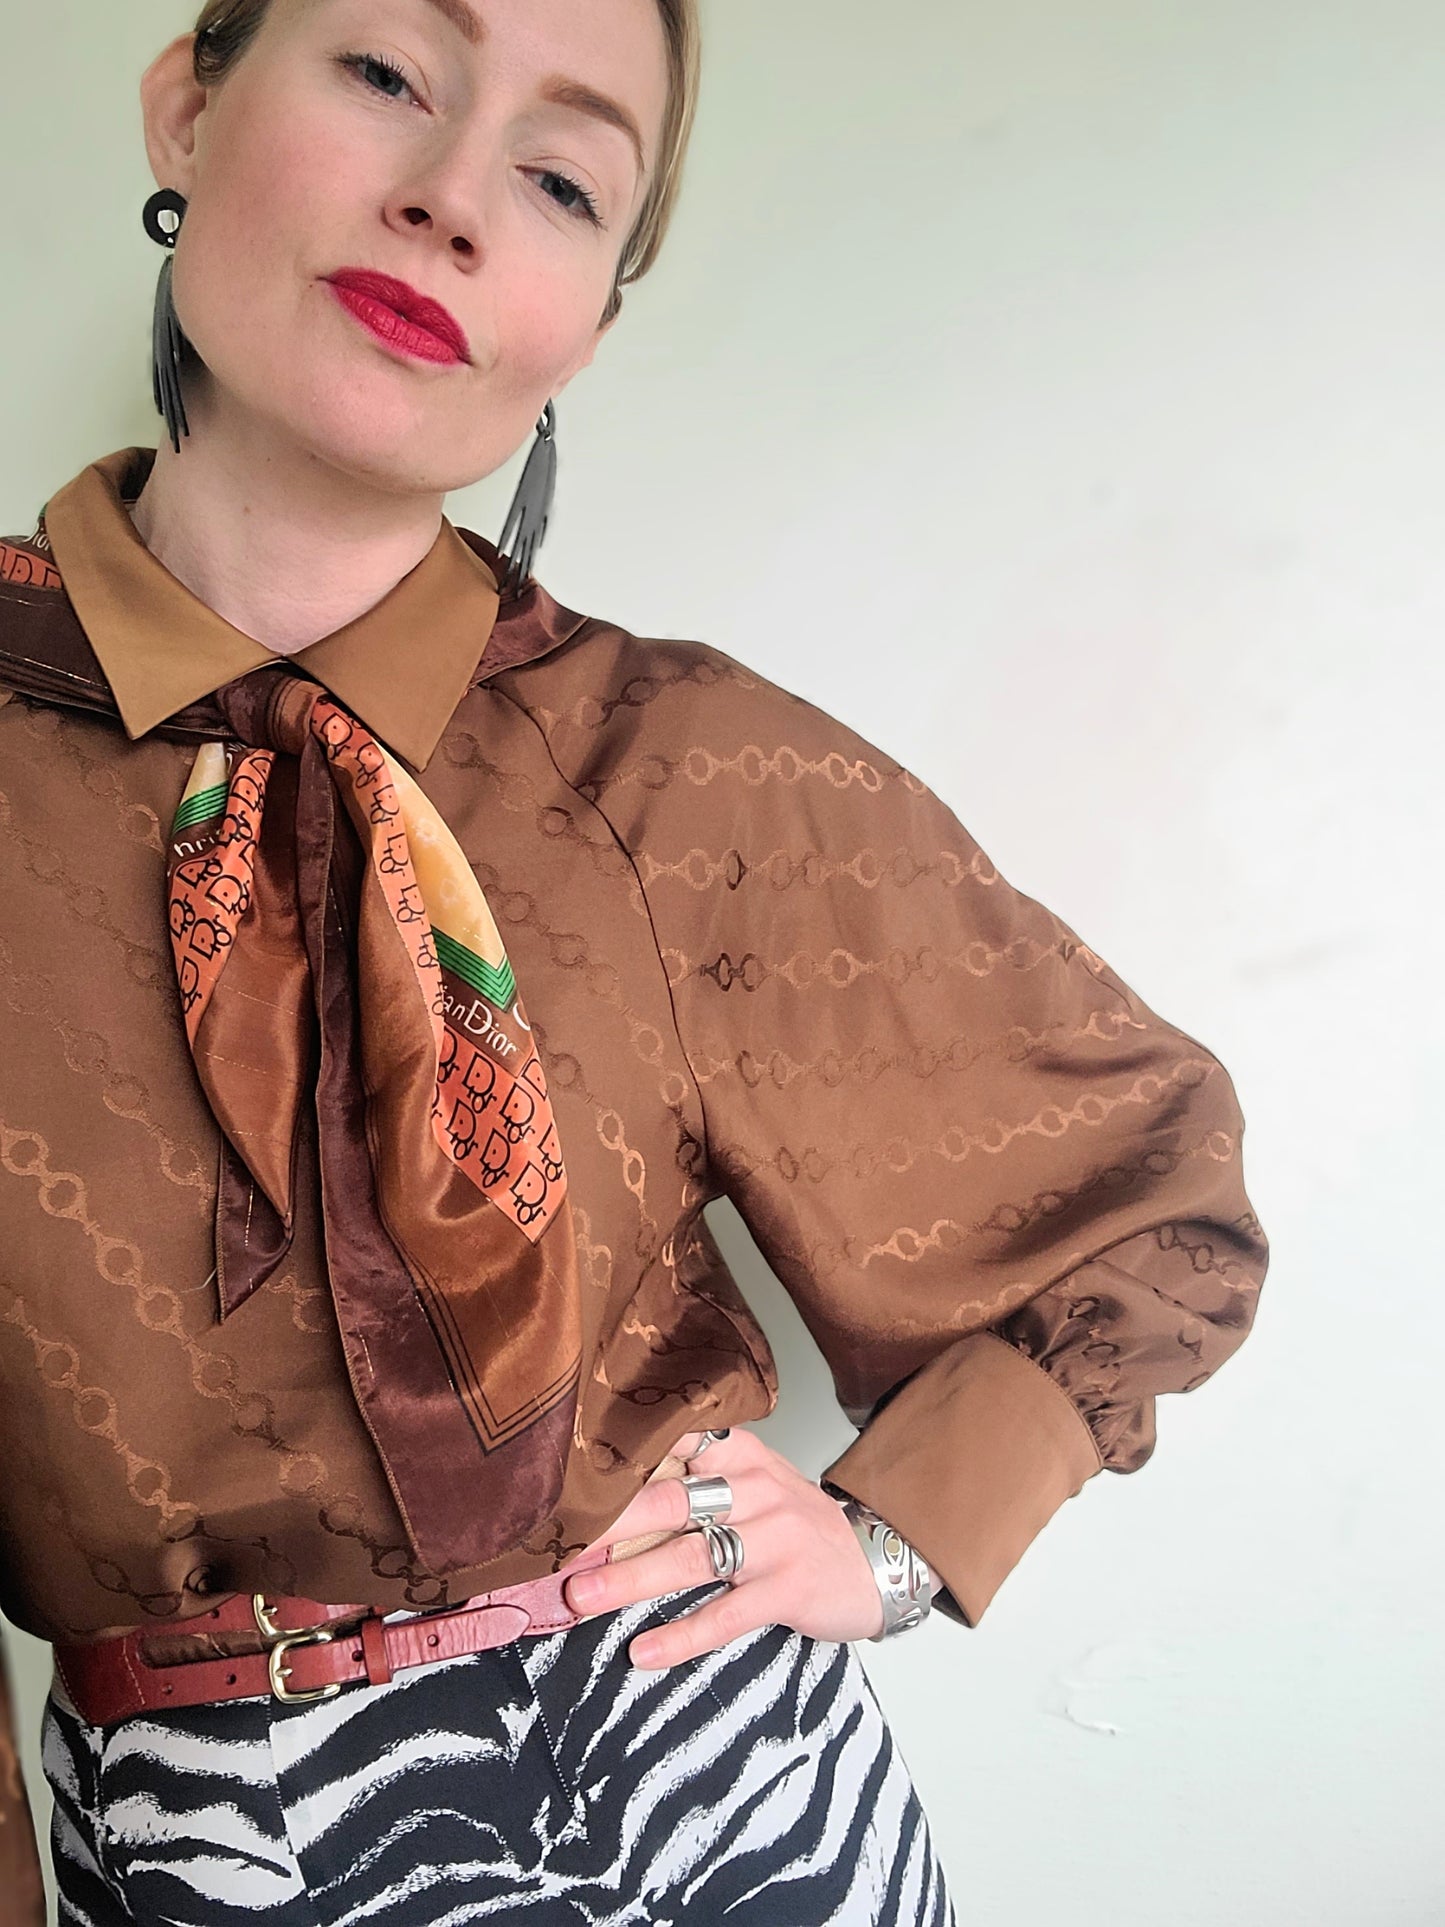 The Horsebit Collared Blouse by AMERI Vintage Undressed S PETITE